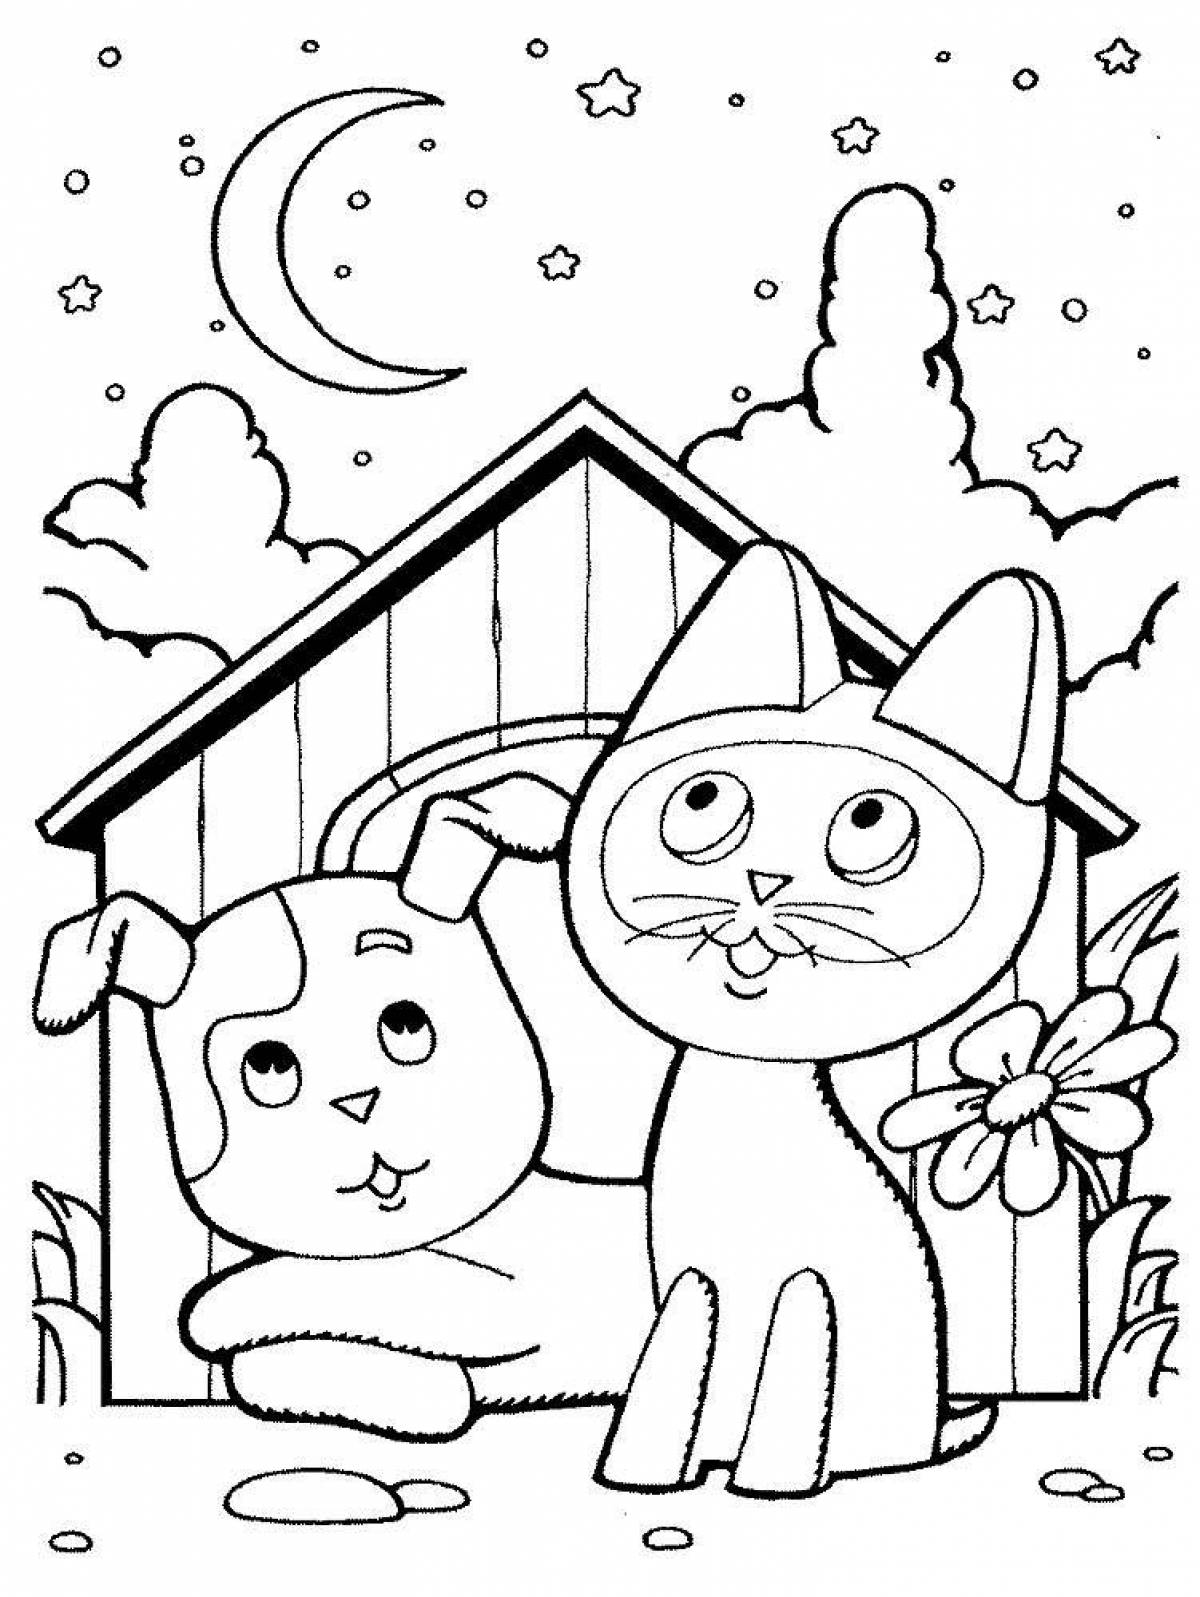 Animated kitten coloring page